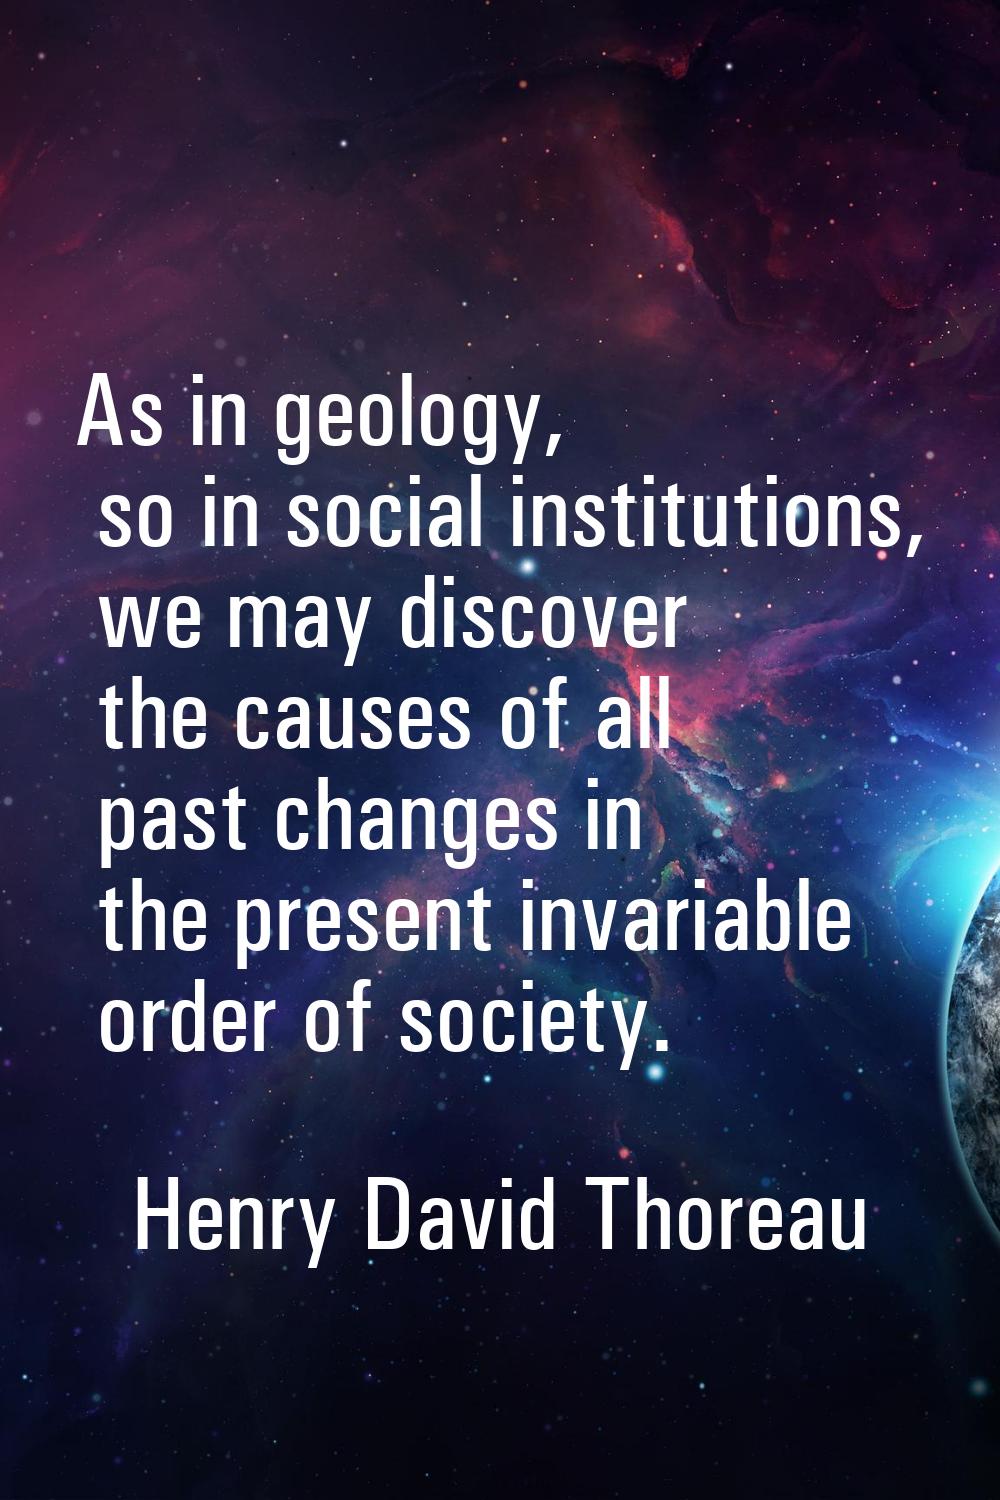 As in geology, so in social institutions, we may discover the causes of all past changes in the pre